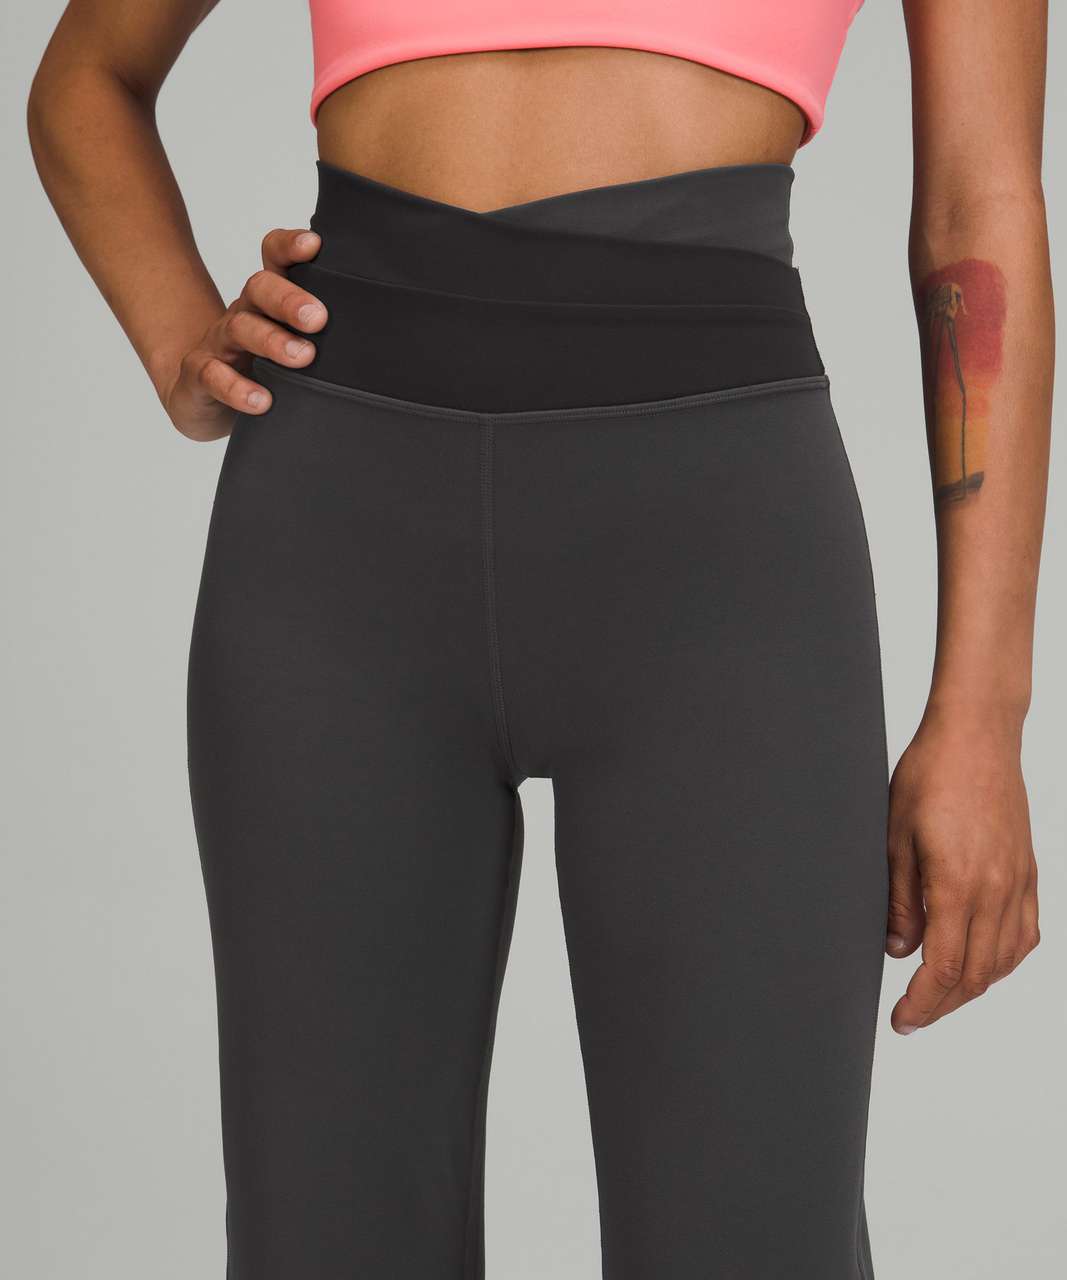 Lululemon astro pants Black Size 4 - $35 (64% Off Retail) - From brooke